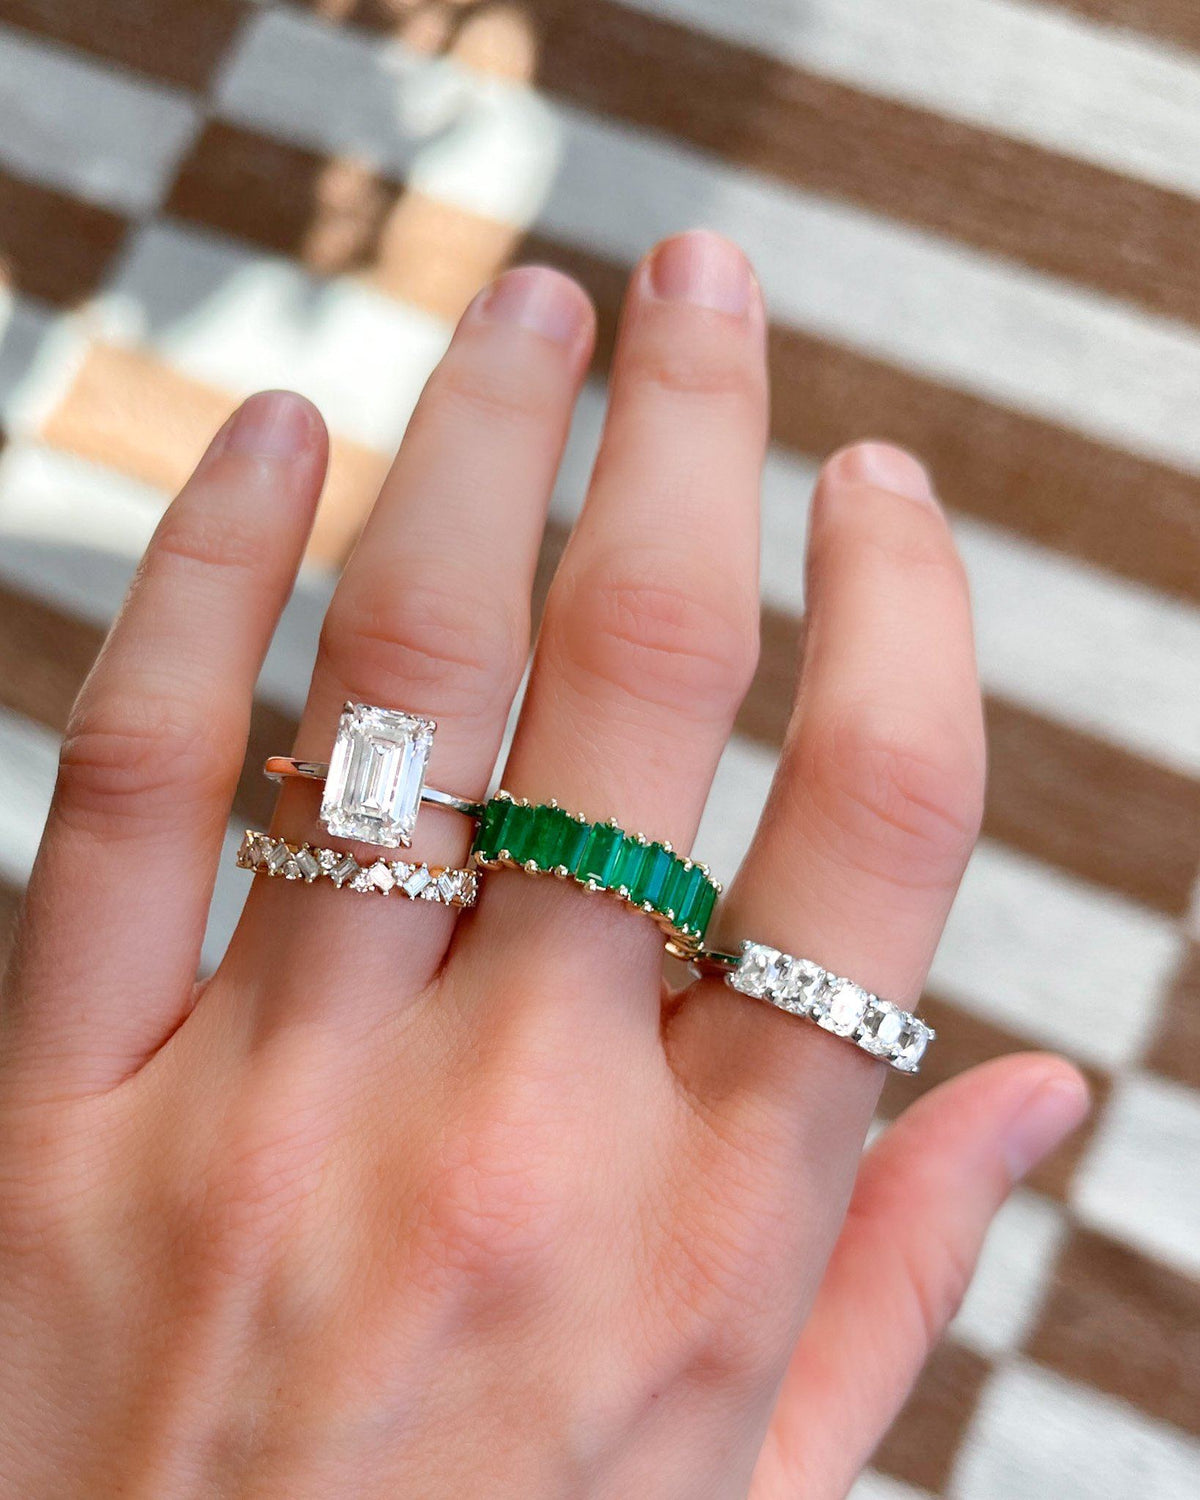 Crescent Solitaire With Emerald Cut (North South) by Good Stone available in Gold and Platinum